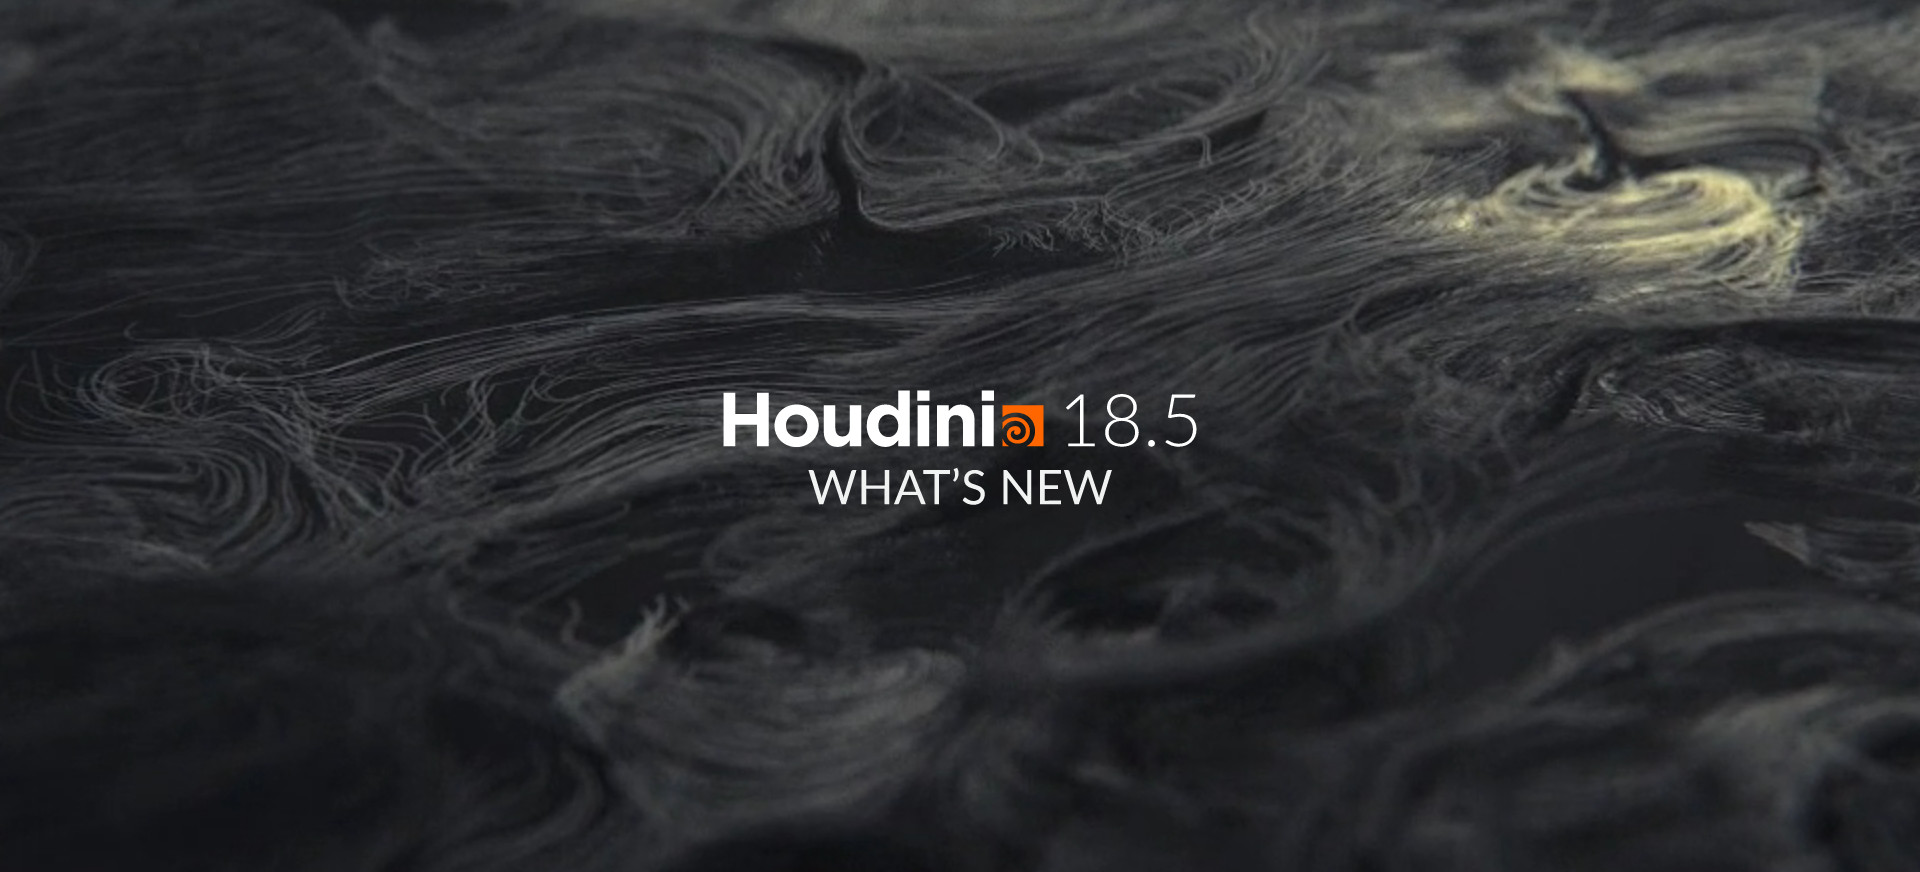 Houdini 18.5 Released - What's new